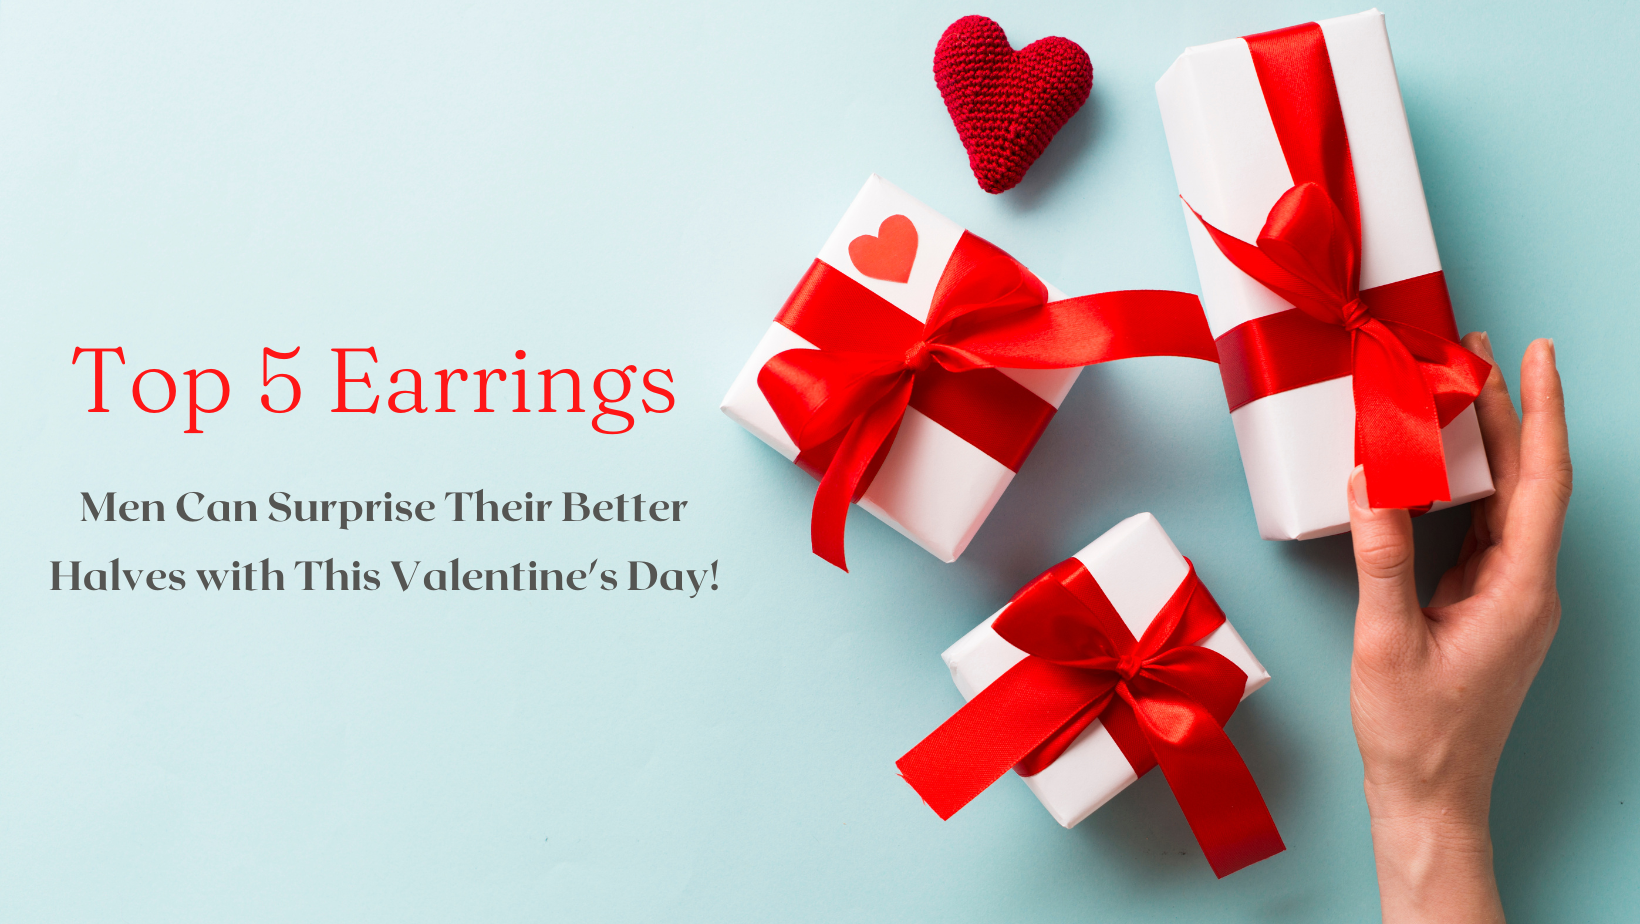 Top 5 Earrings Men Can Surprise Their Better Halves with This Valentine's Day!